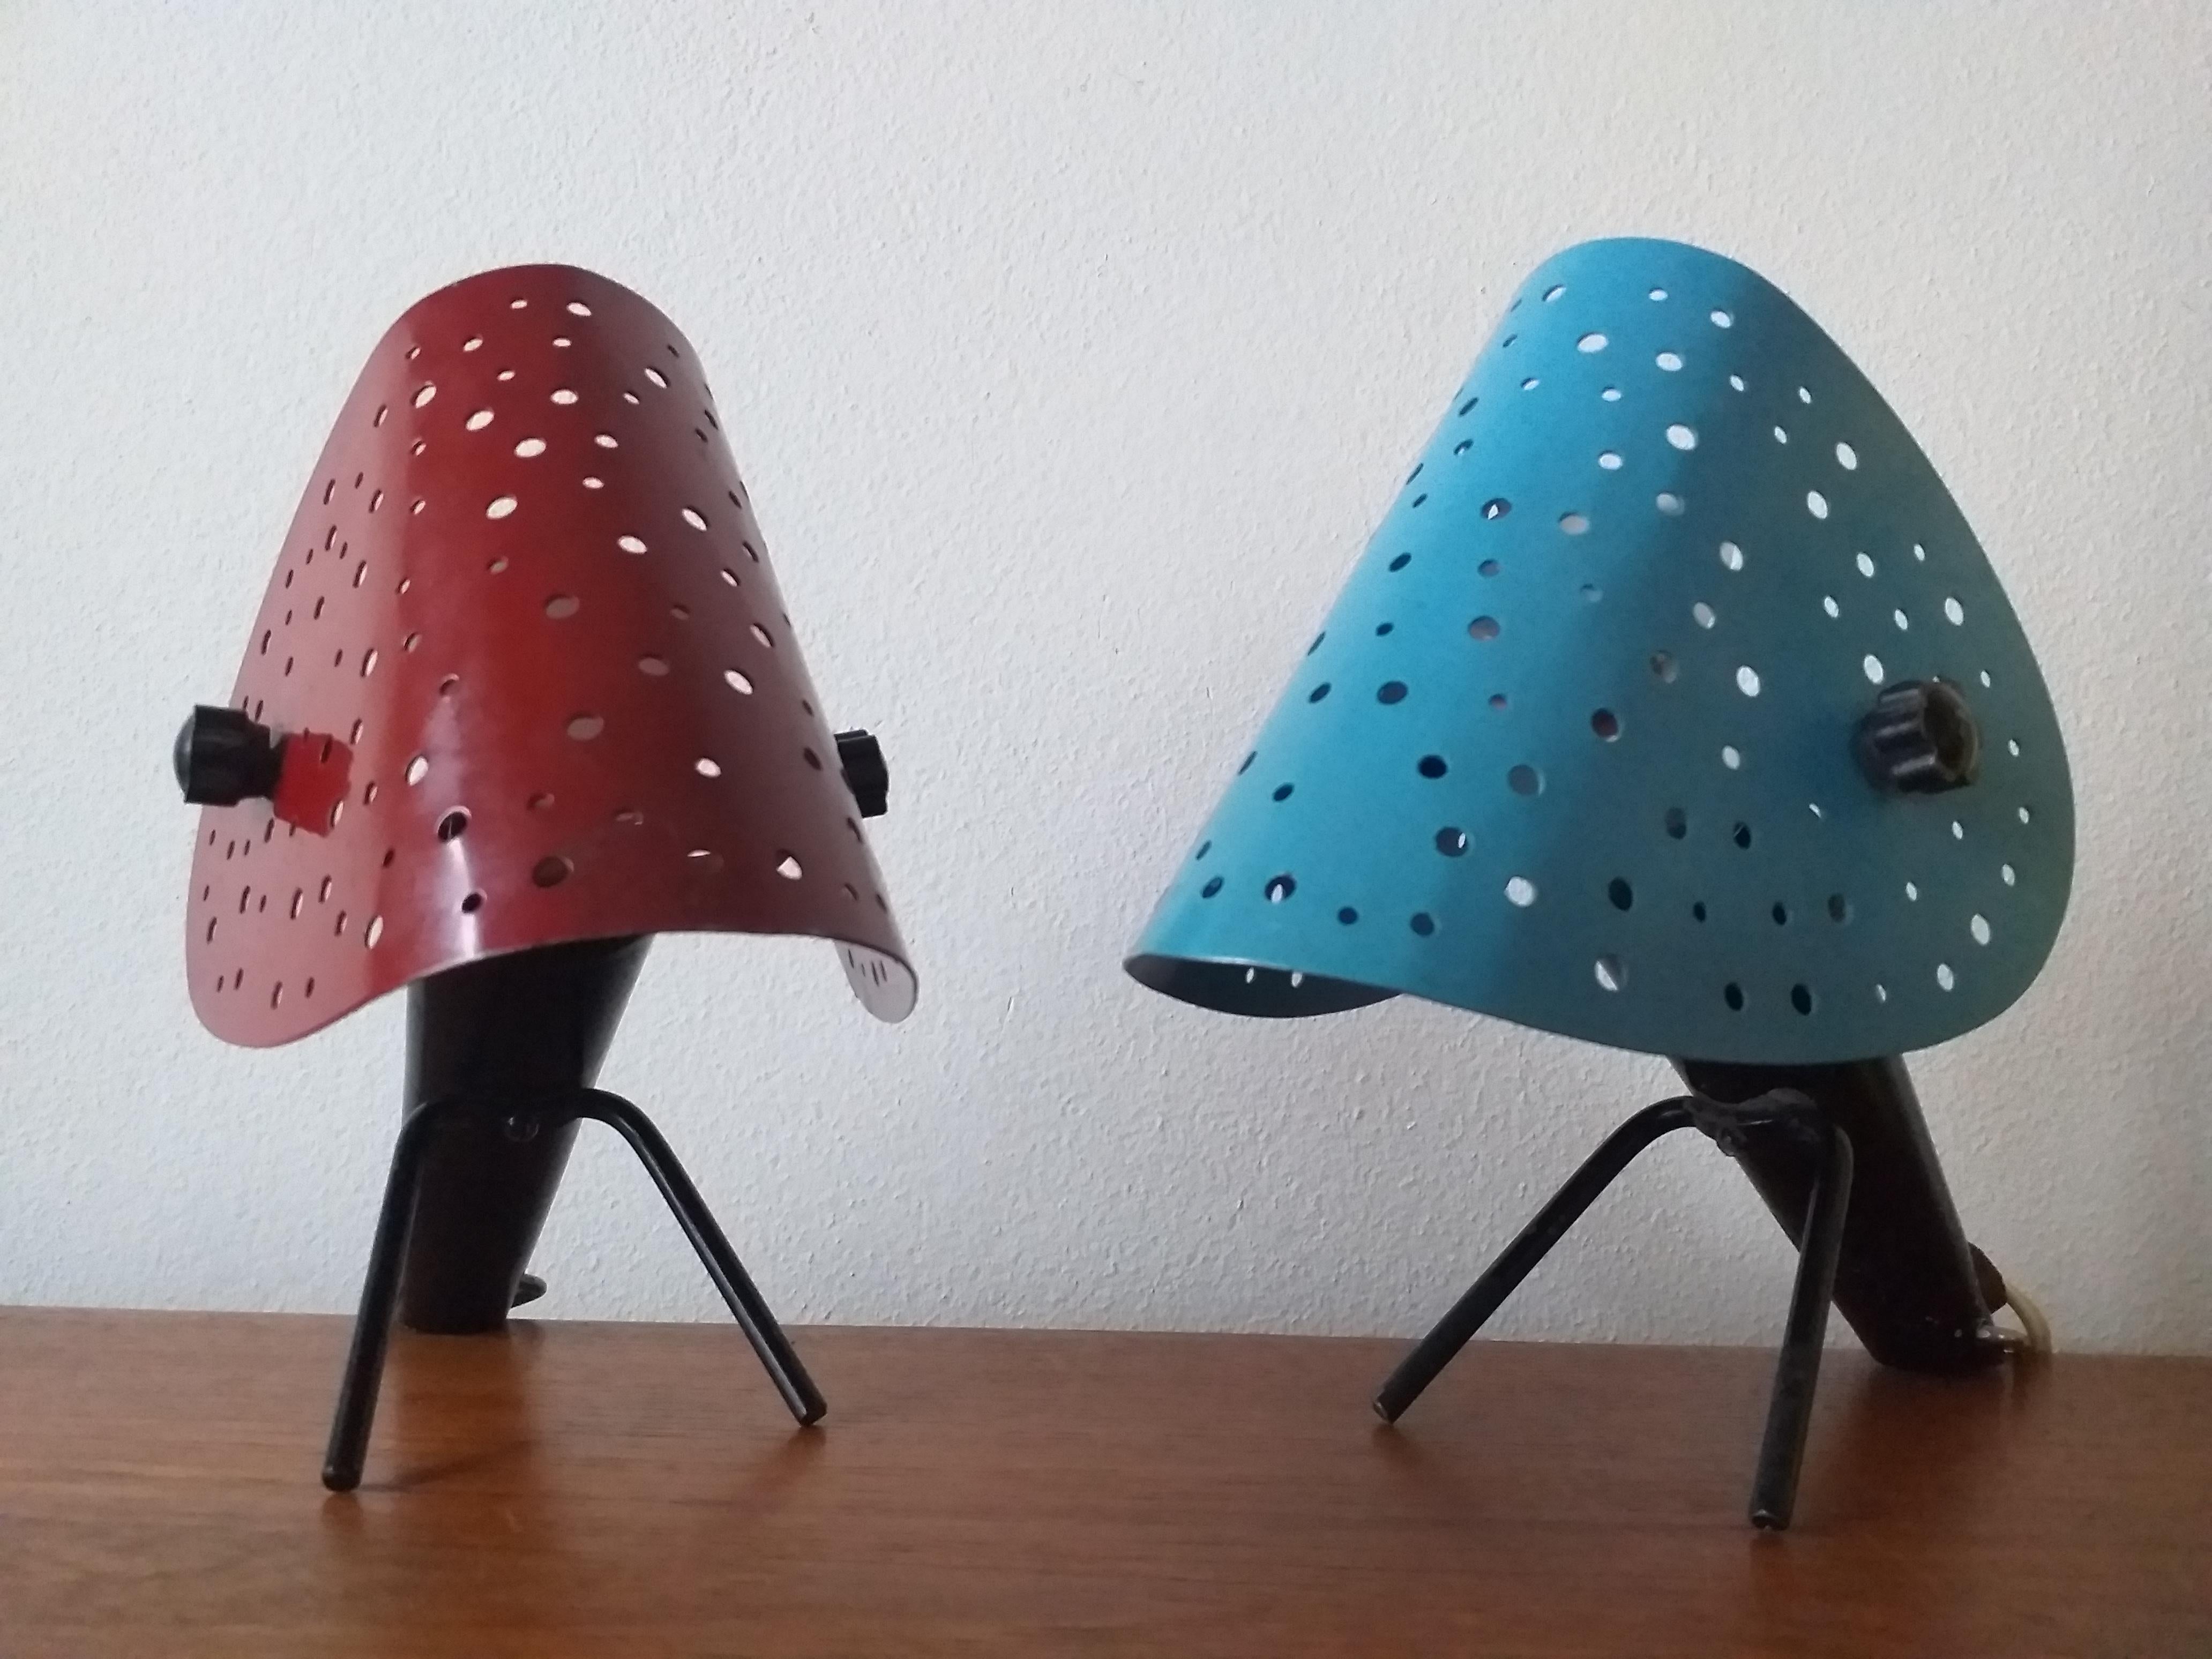 Pair of Midcentury Table Lamps by Ernst Igl for Hillebrand, 1950s For Sale 4